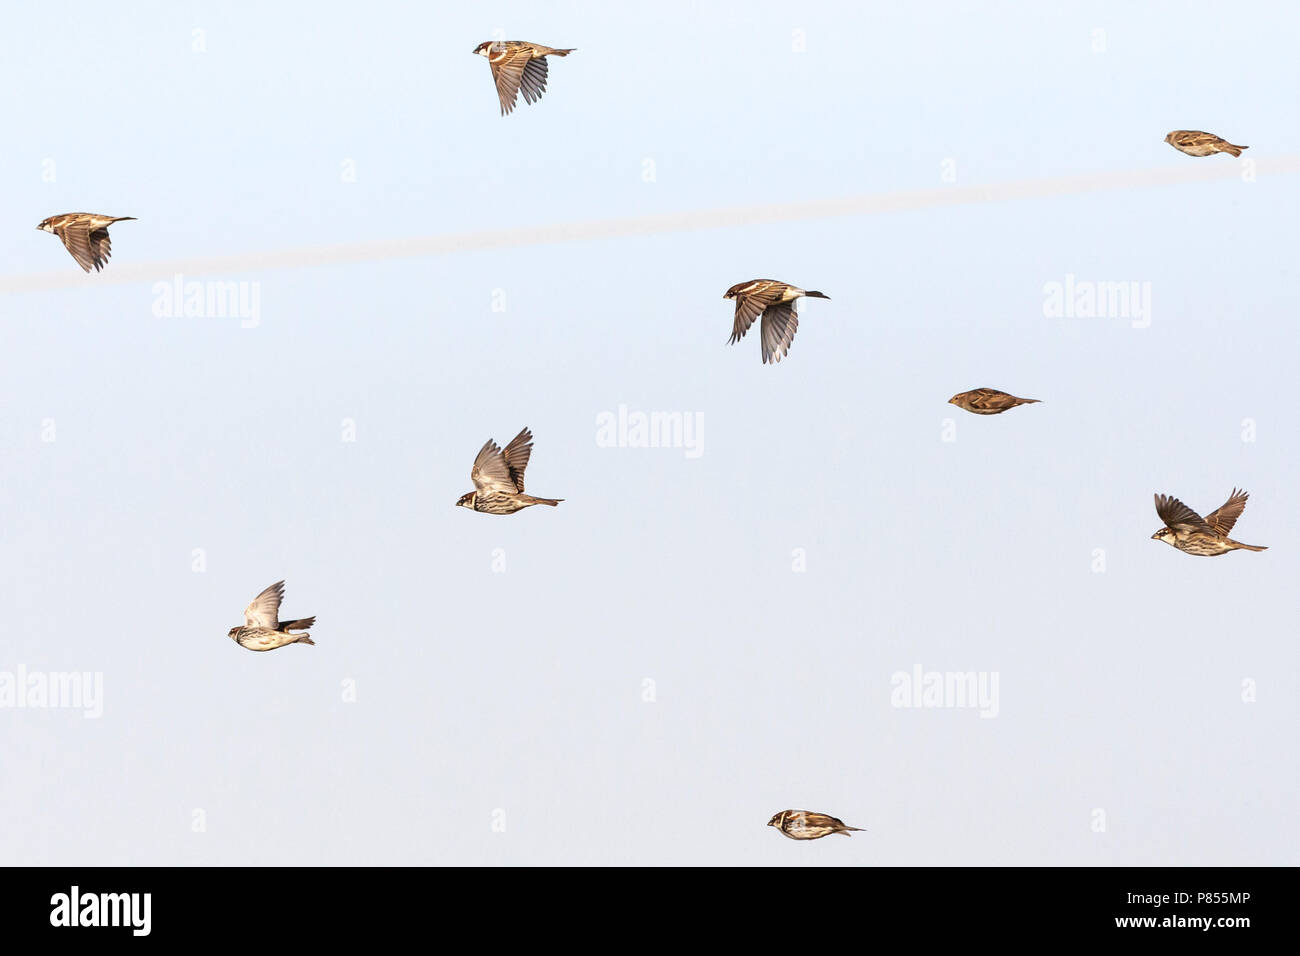 Flock of Spanish Sparrows (Passer hispaniolensis) during spring migration in southern negev, Israel. Stock Photo